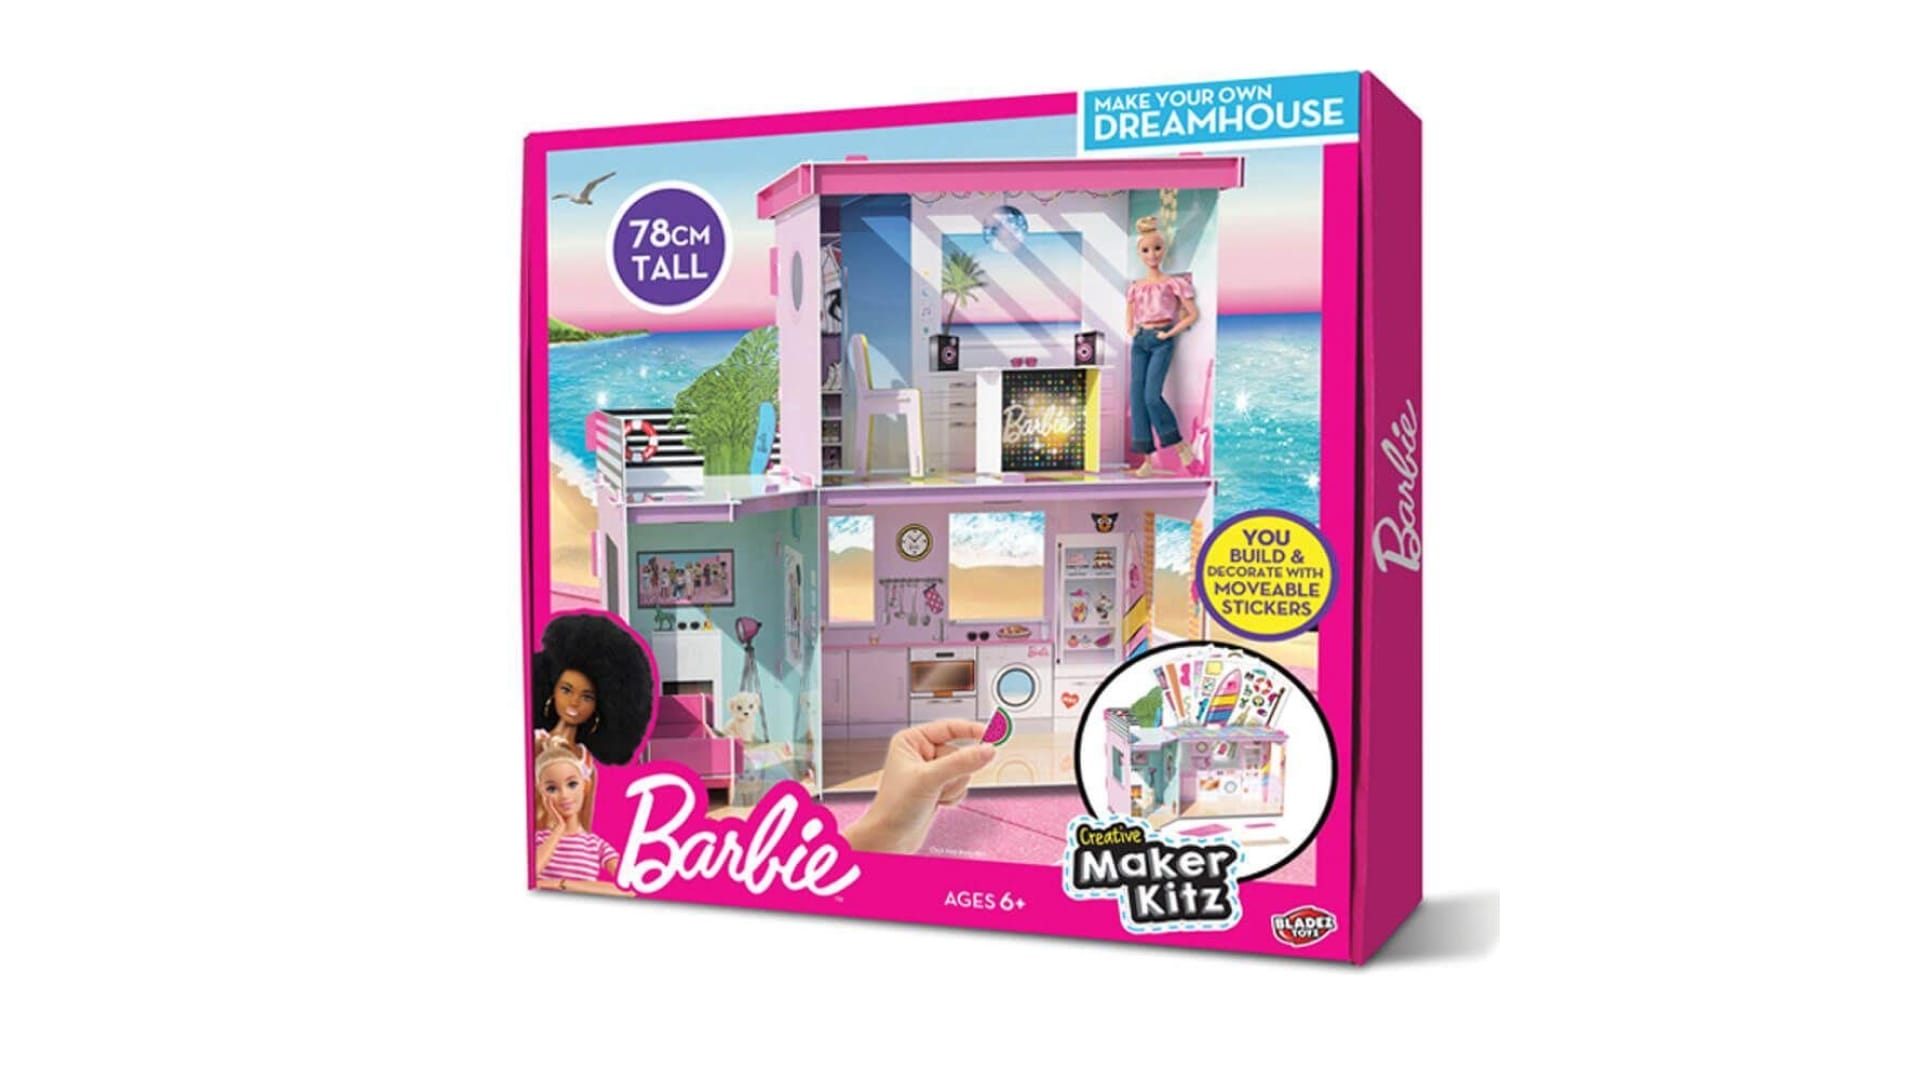 The Make your own Barbie Dream House is in this year's top ten toys list